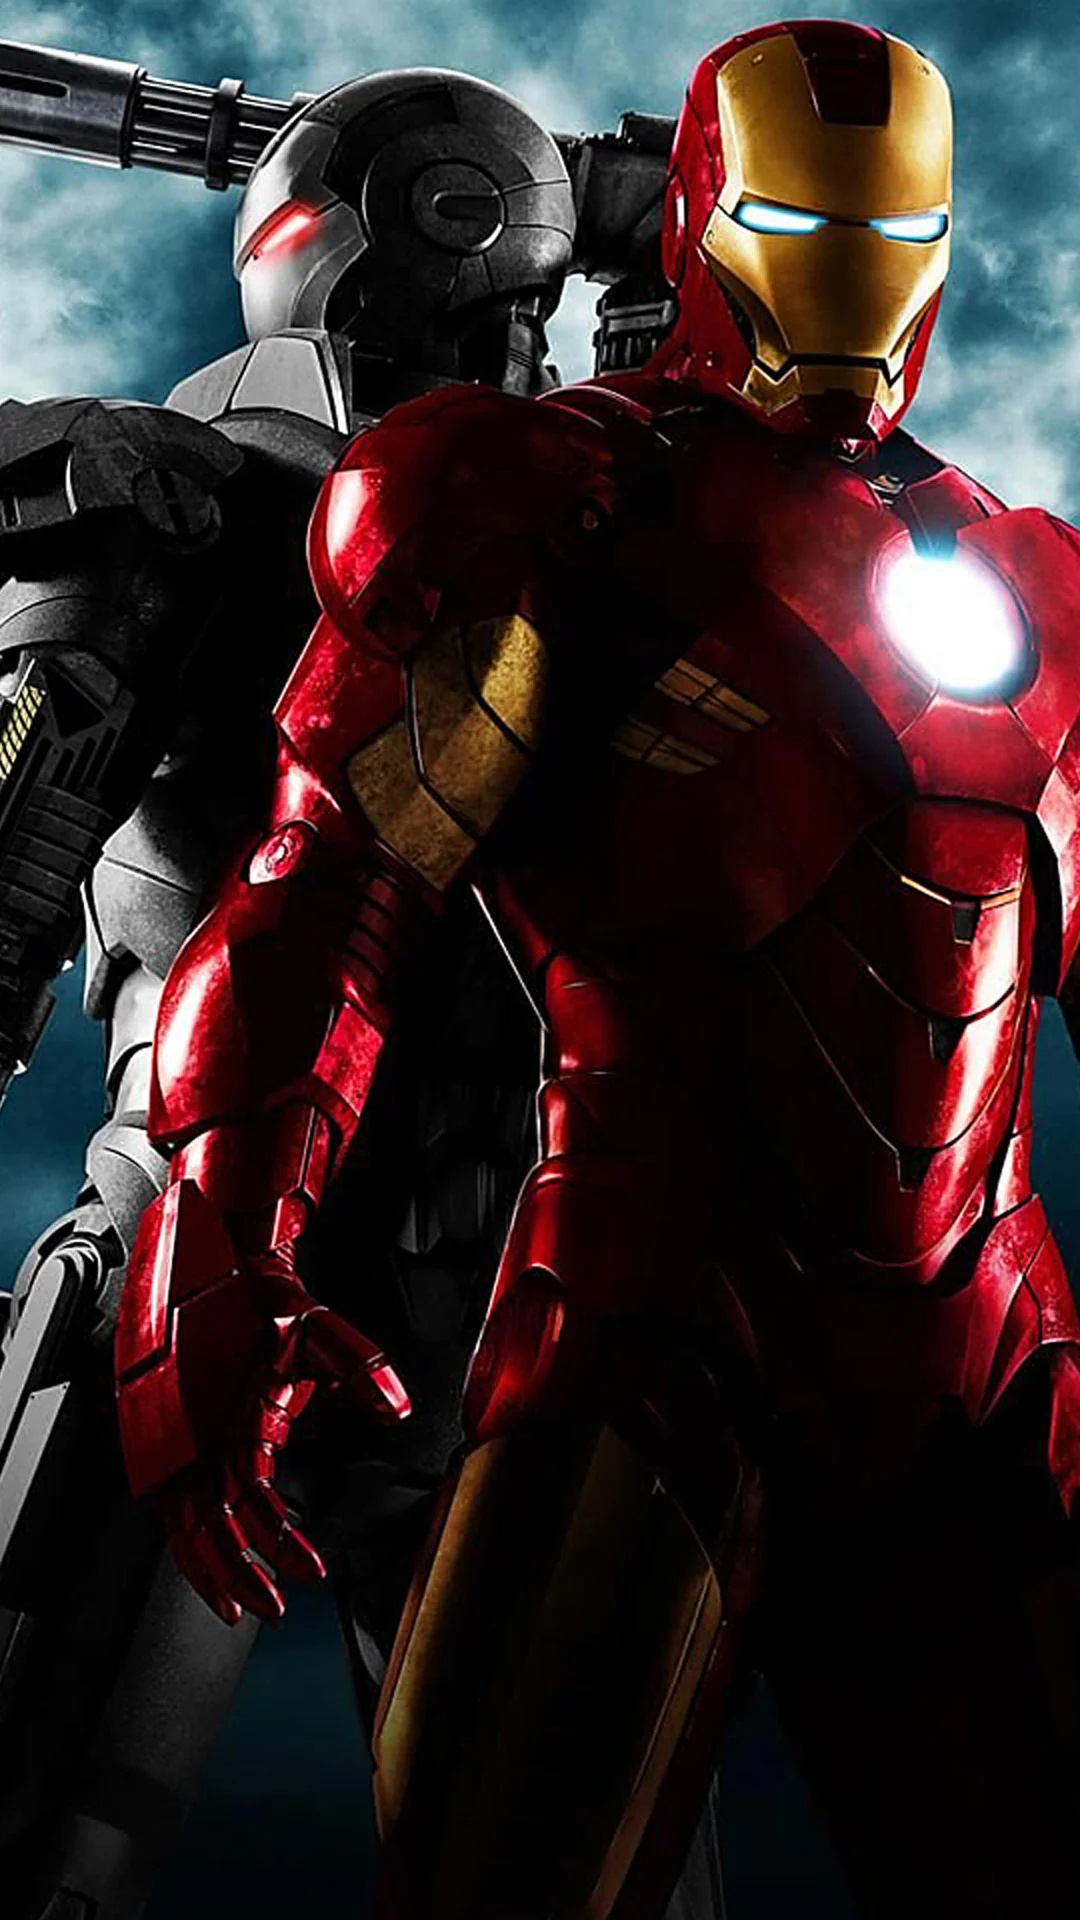 Iron Man: Tony Stark's greatest suits, Advanced with firepower, the arc reactors, nano-gauntlets. 1080x1920 Full HD Background.